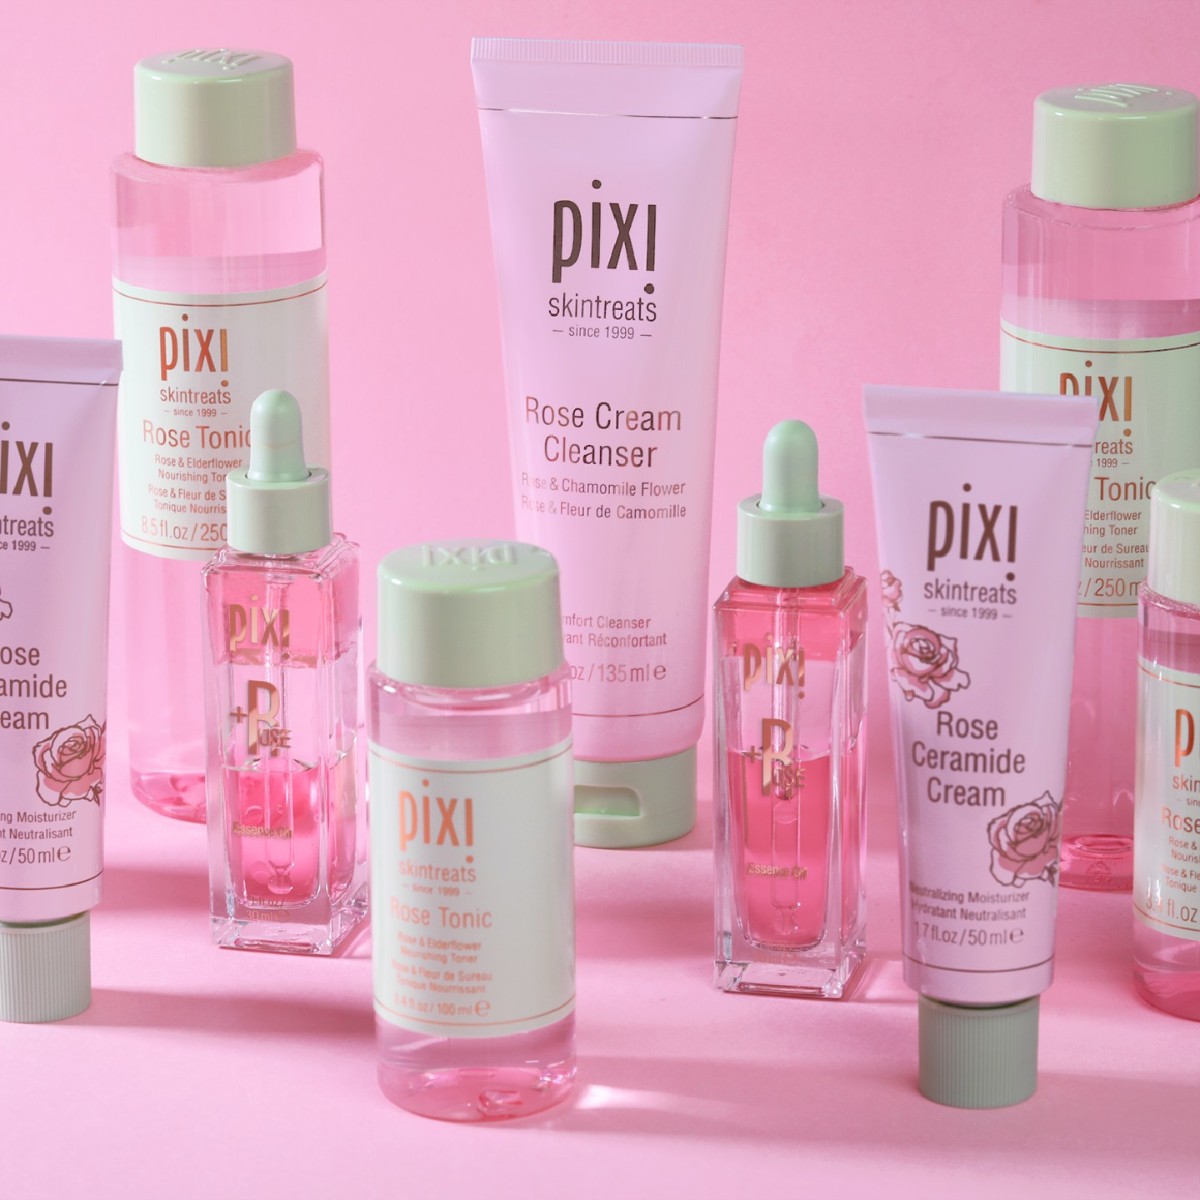 Reach for Rose for instantly raised radiance! 🌹💖 Our flower-infused essentials will replenish, restore and renew skin! Time to reap the benefits of Rose! 🌹 Rose Ceramide Cream 🌹 Rose Tonic 🌹 +Rose Essence Oil 🌹 Rose Cream Cleanser #PixiBeauty #Skintreats #Colourtreats